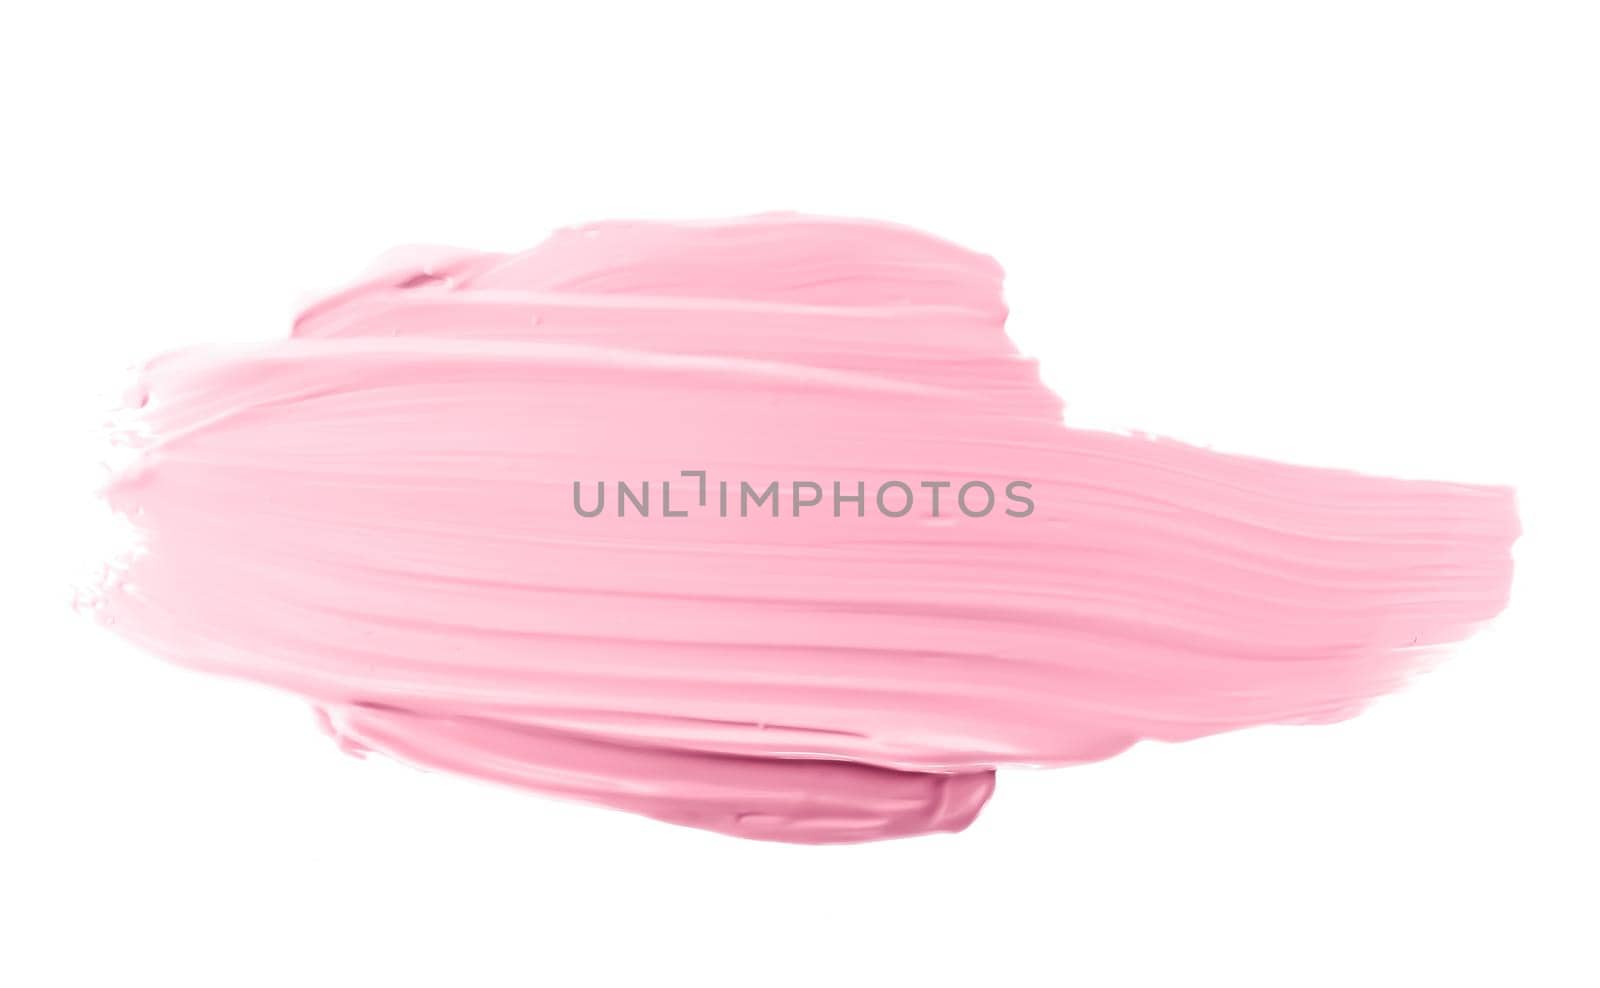 Pastel pink beauty swatch, skincare and makeup cosmetic product sample texture isolated on white background, make-up smudge, cream cosmetics smear or paint brush stroke closeup